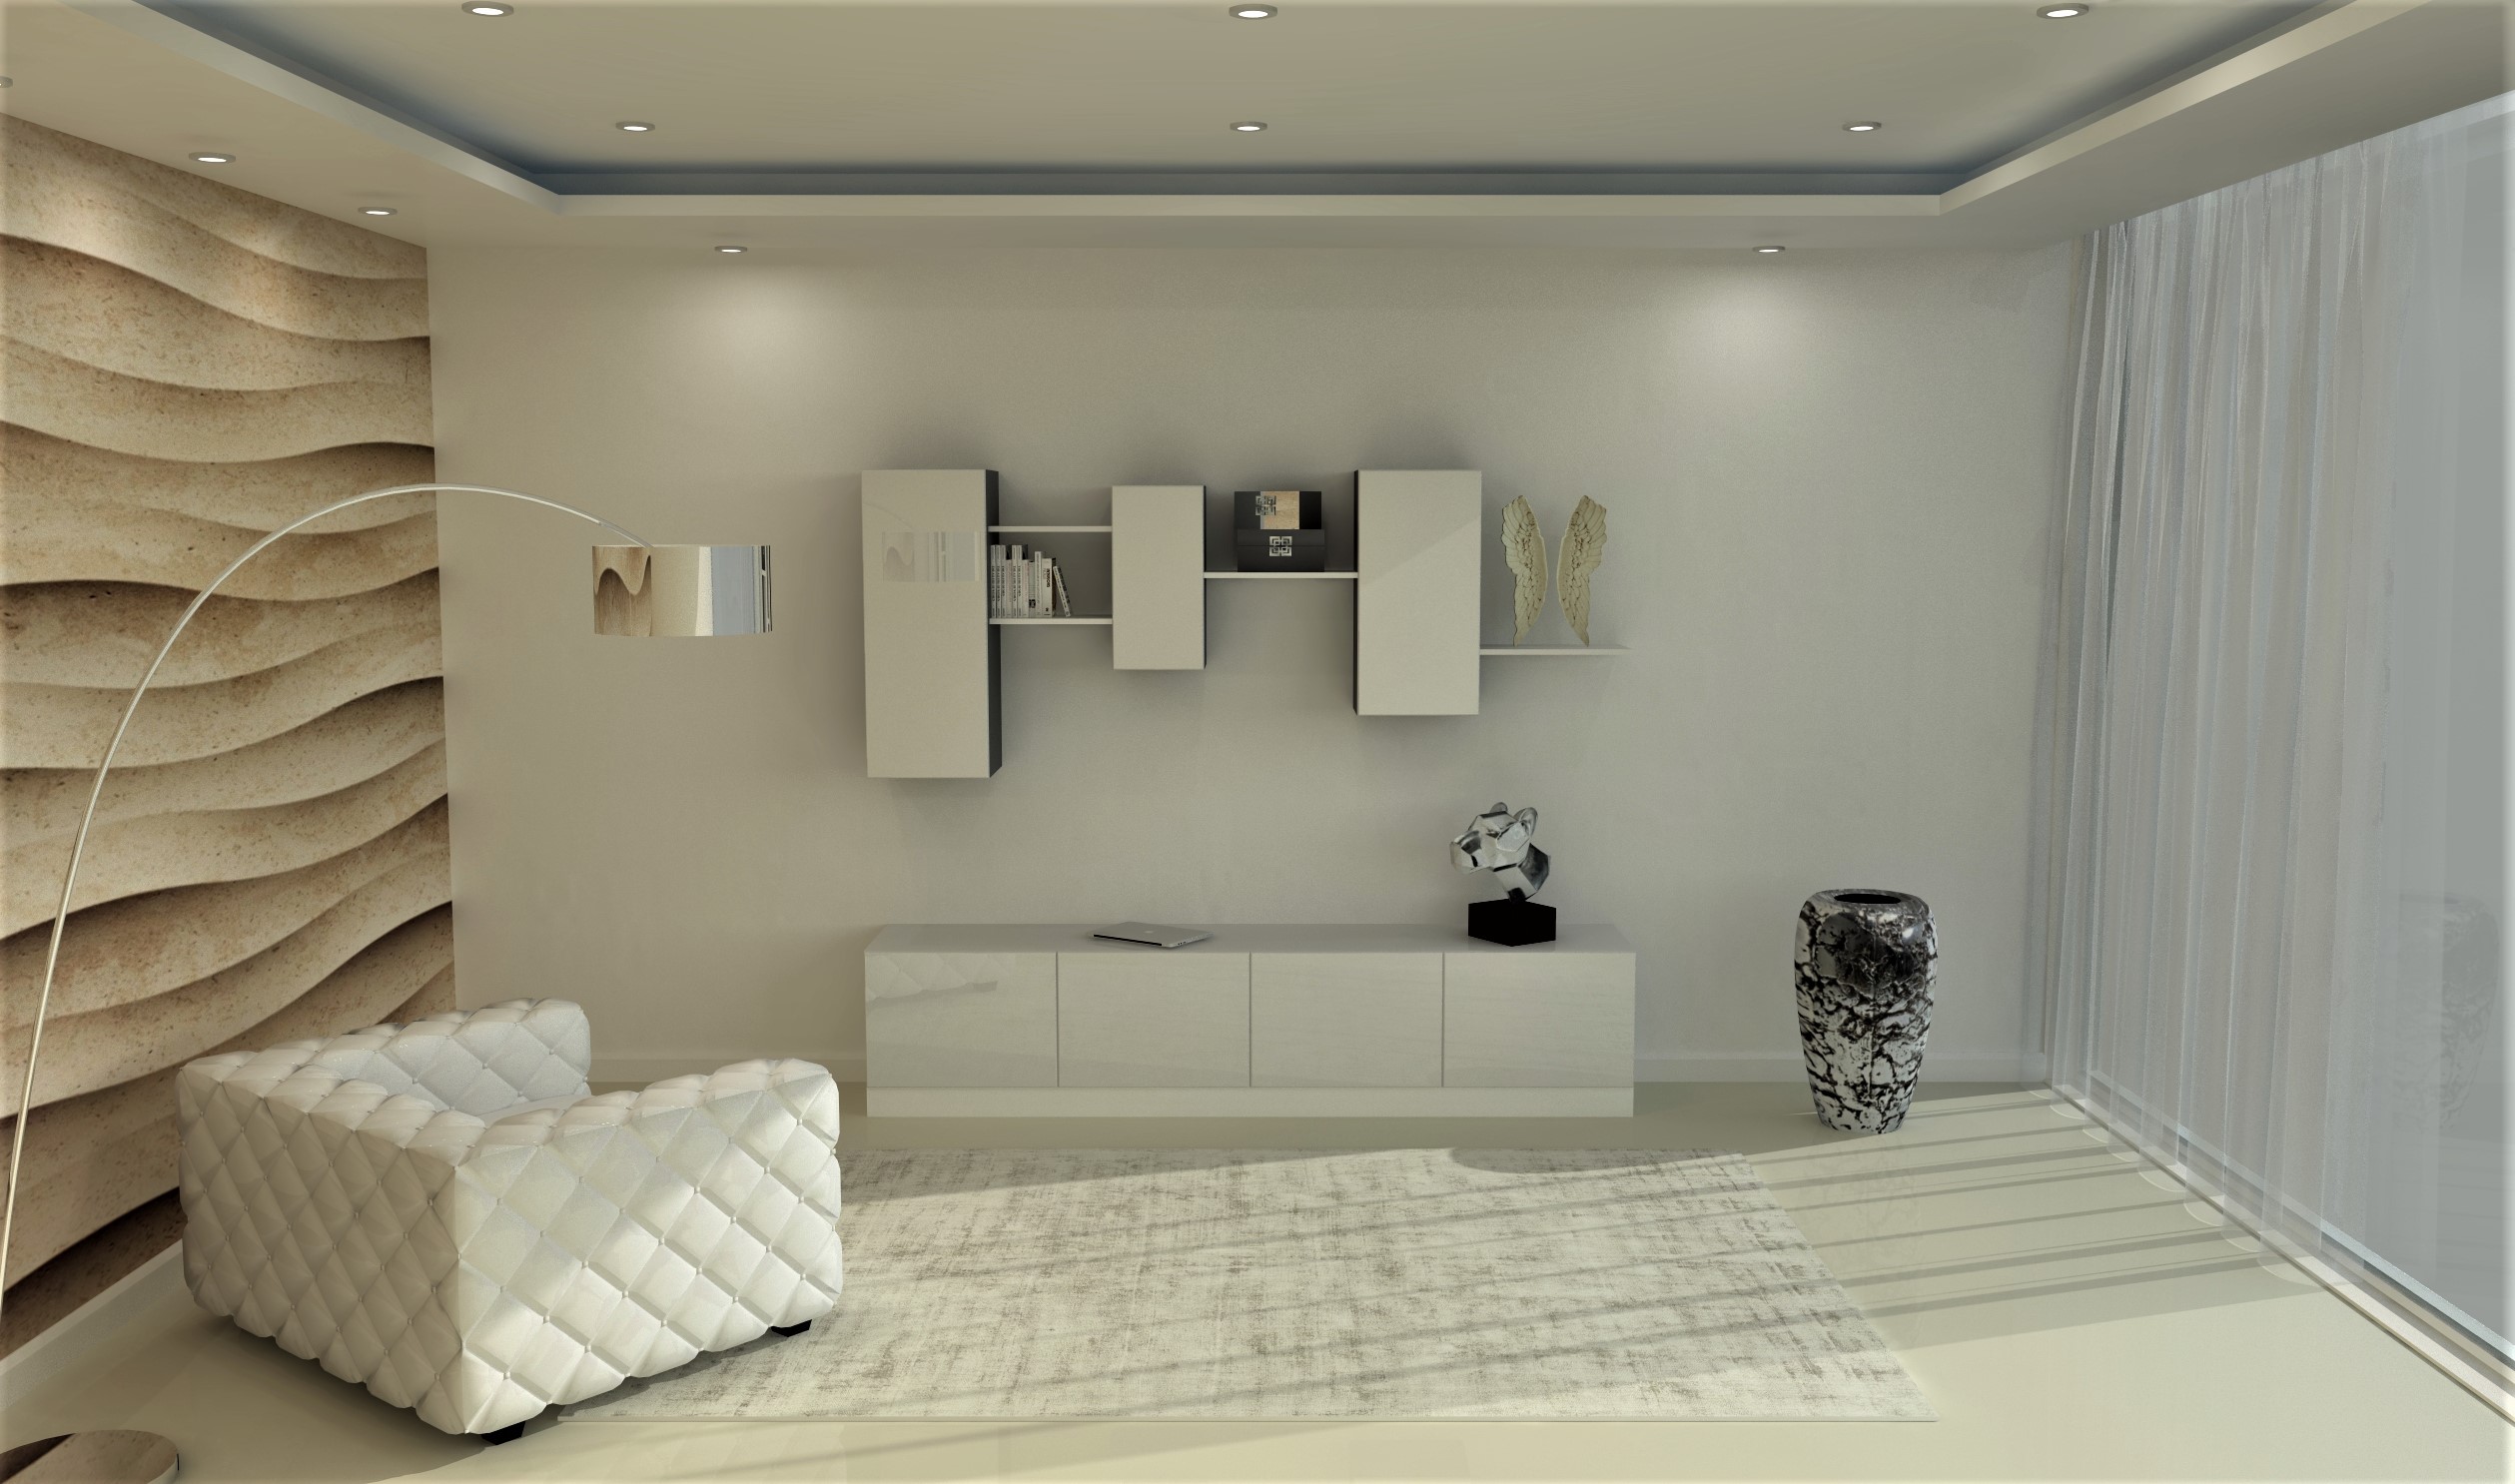 Living Room Set In High Gloss White And